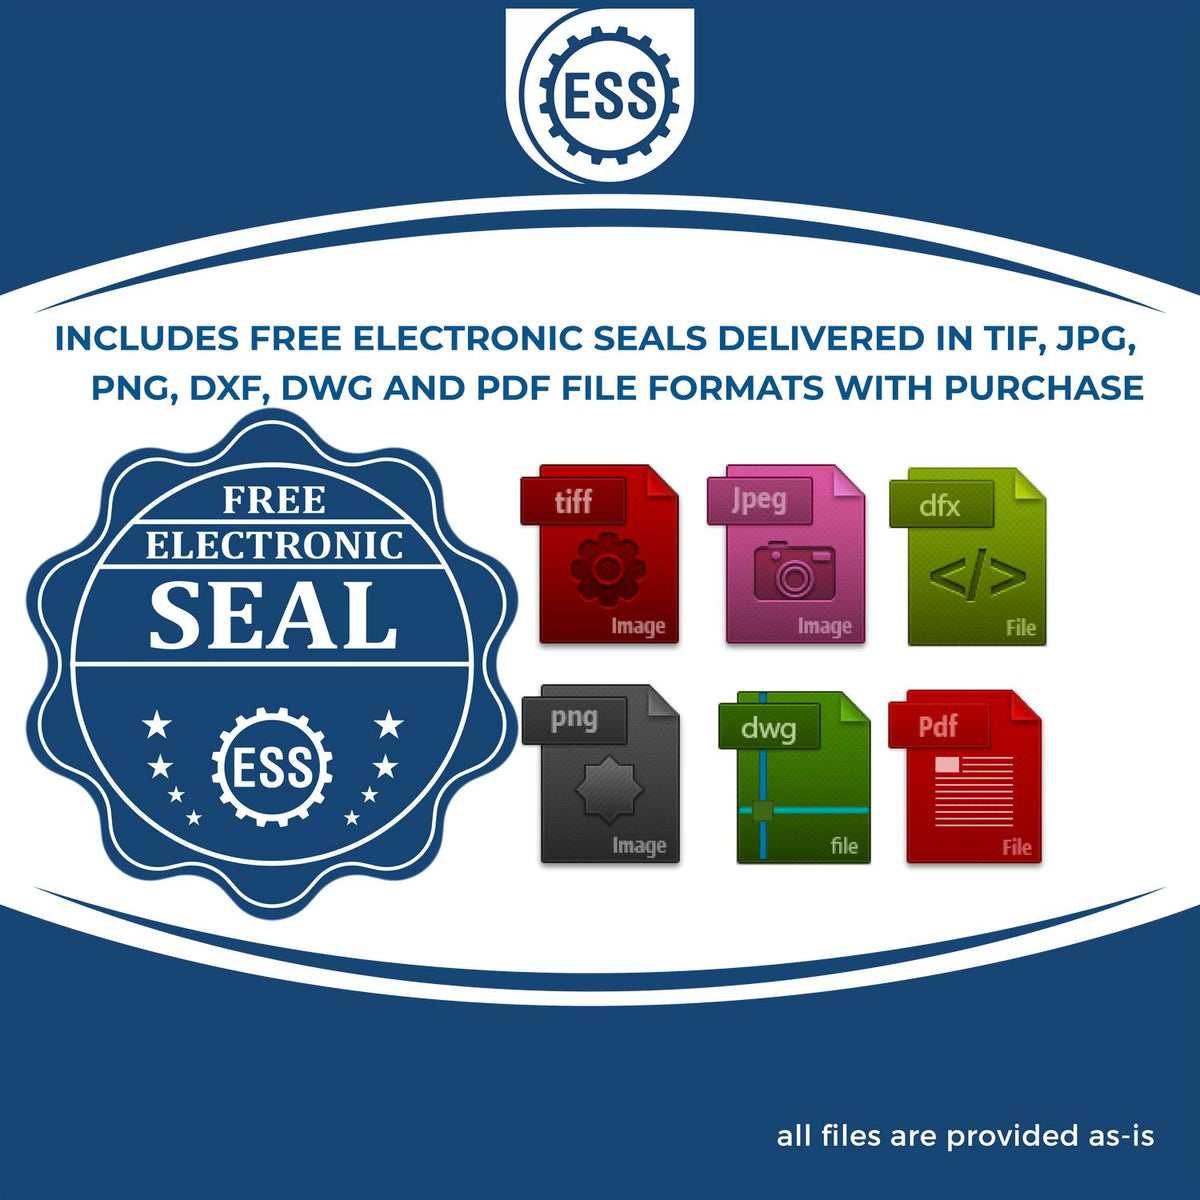 An infographic for the free electronic seal for the Extended Long Reach Delaware Architect Seal Embosser illustrating the different file type icons such as DXF, DWG, TIF, JPG and PNG.